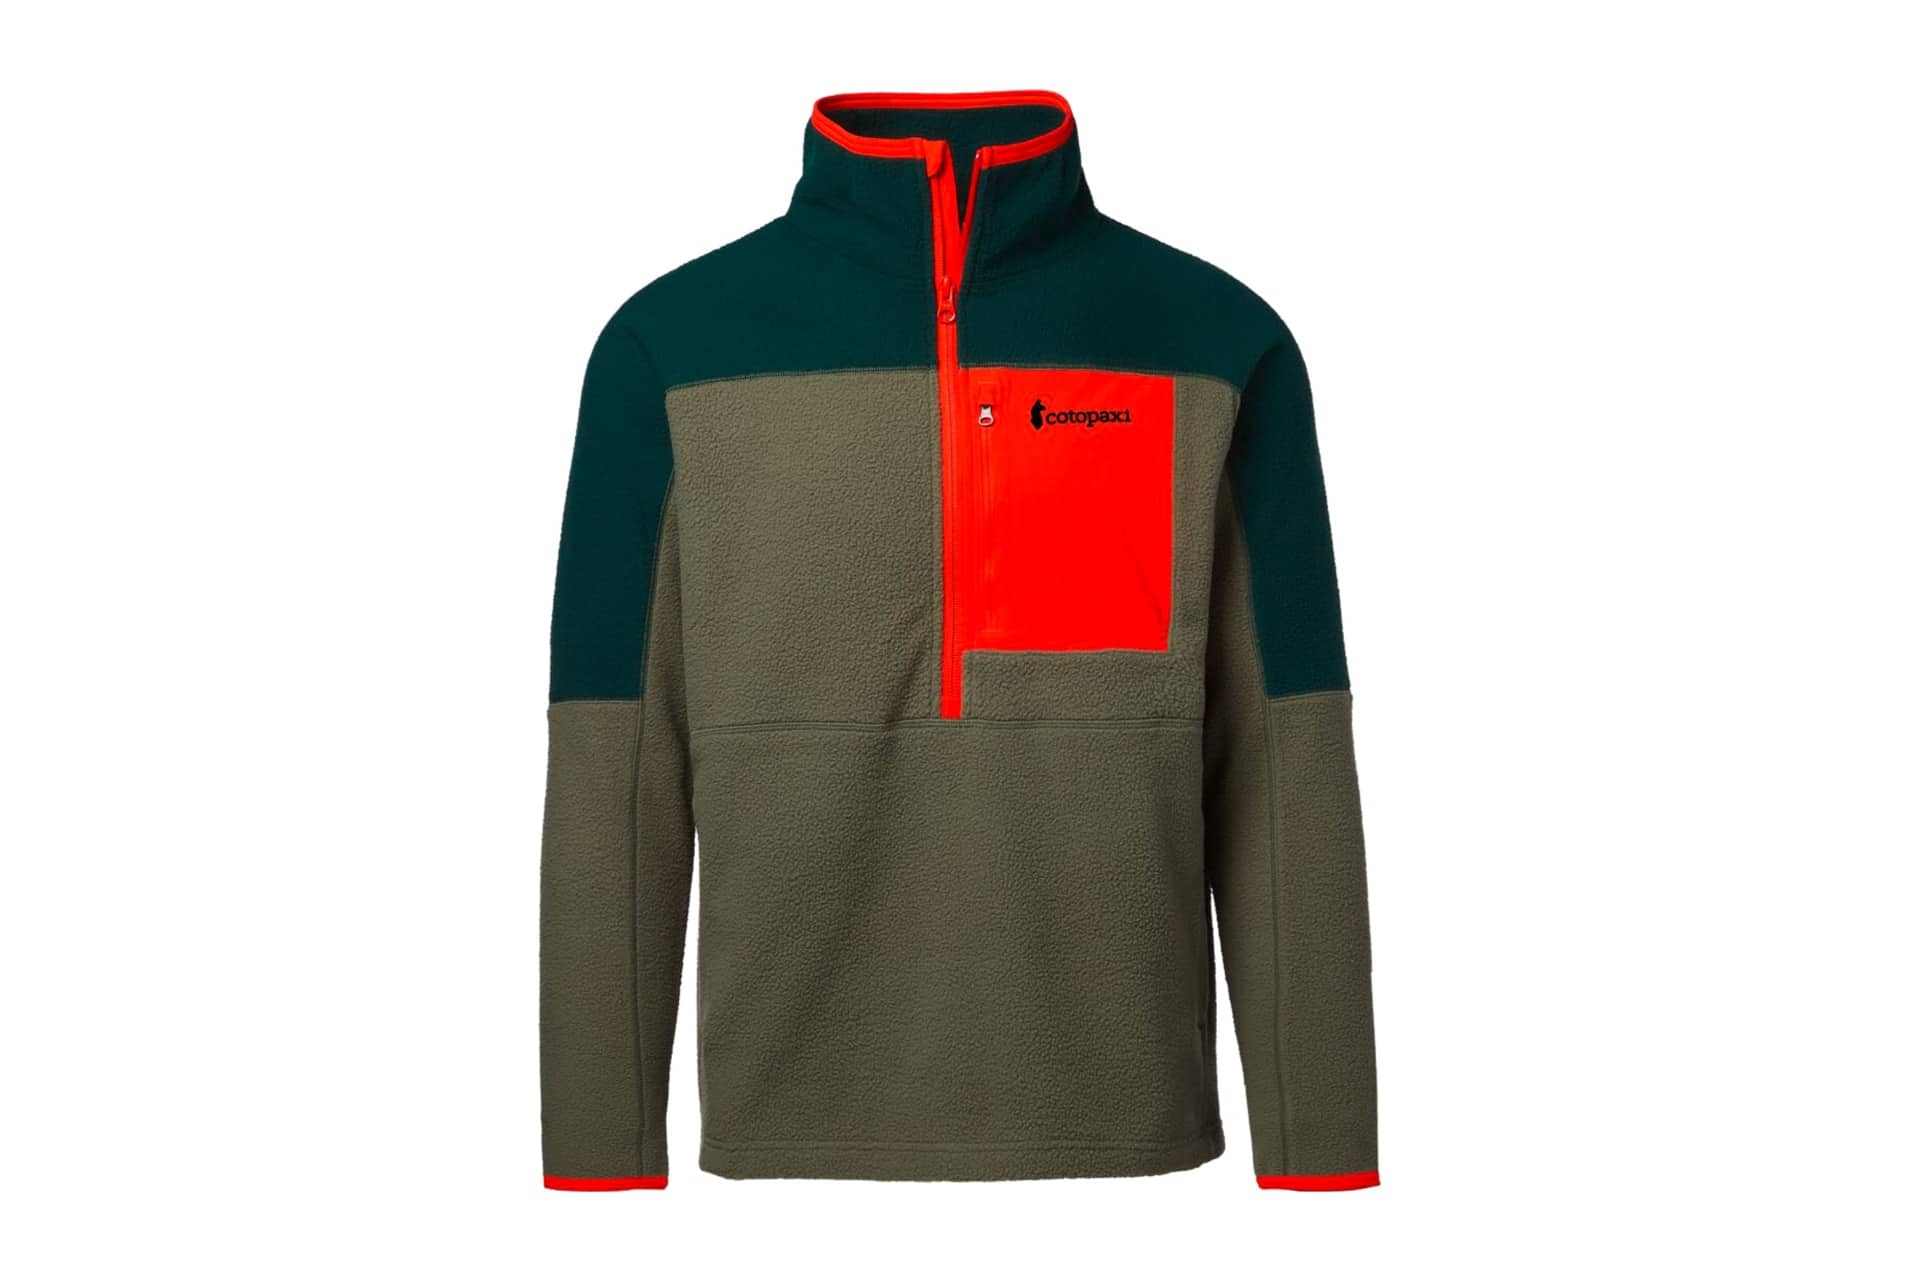 fleece pullover sweater in shades of green and red